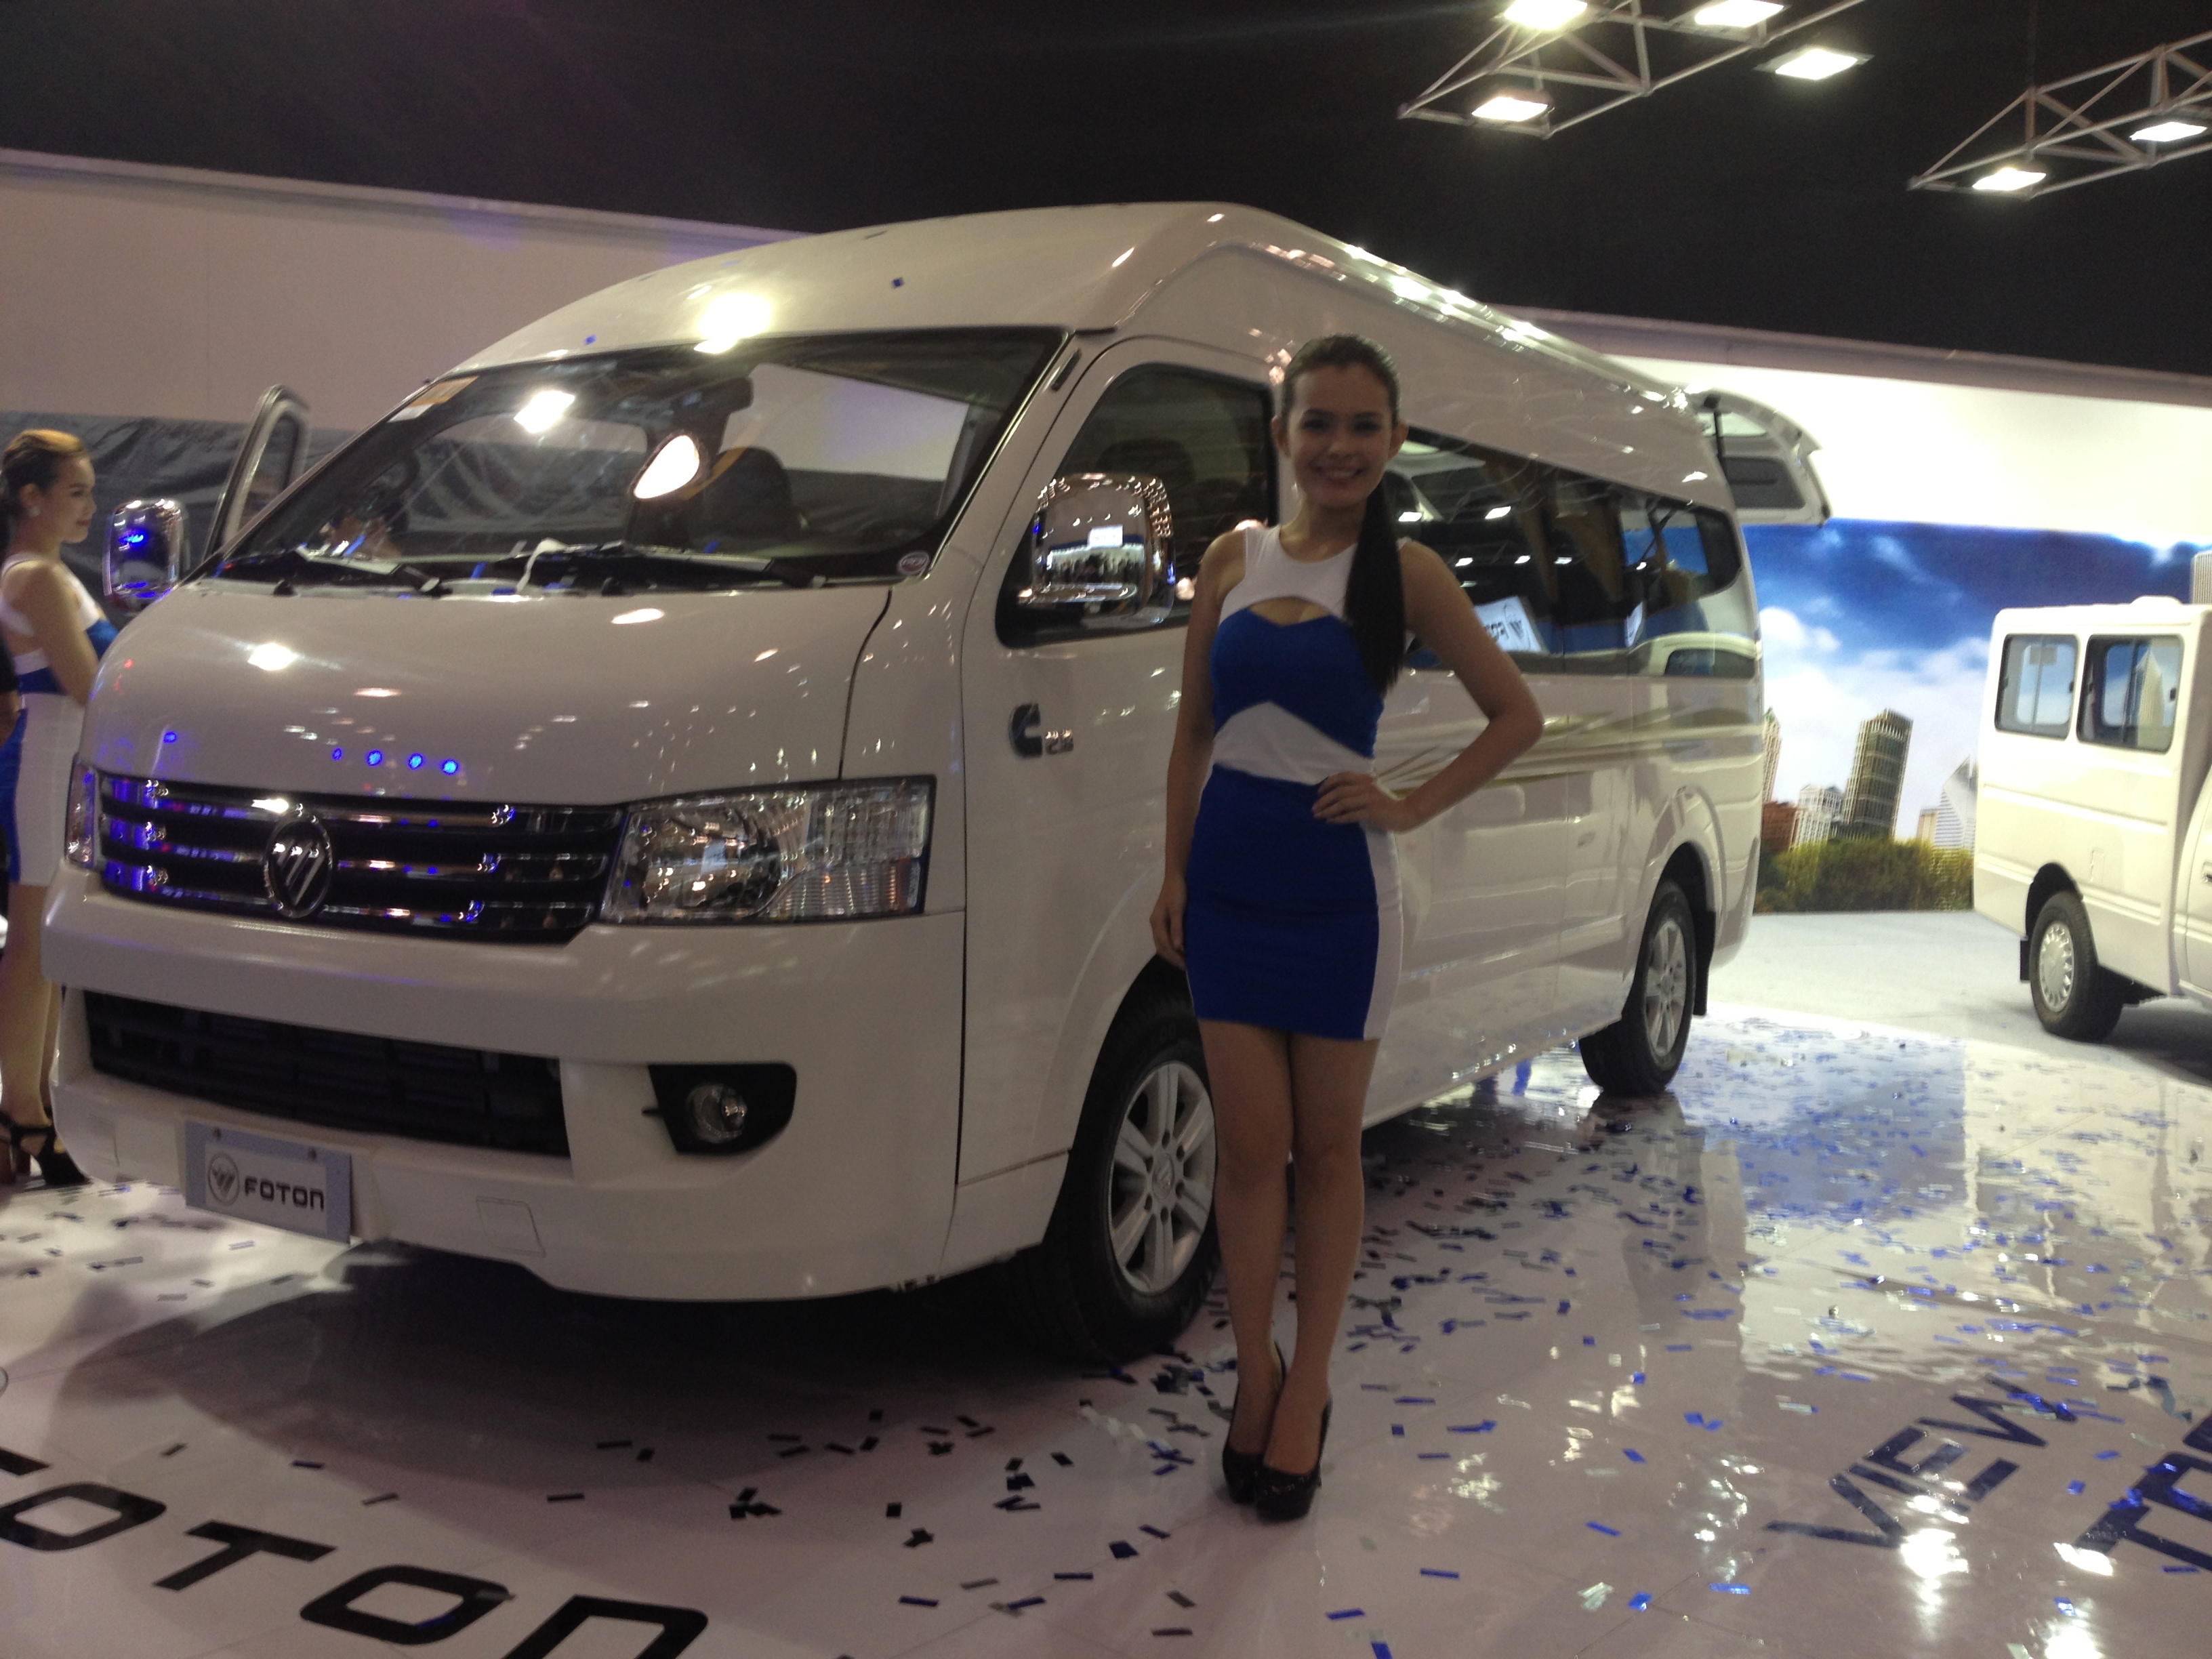 The Foton View Traveller after it was unveiled